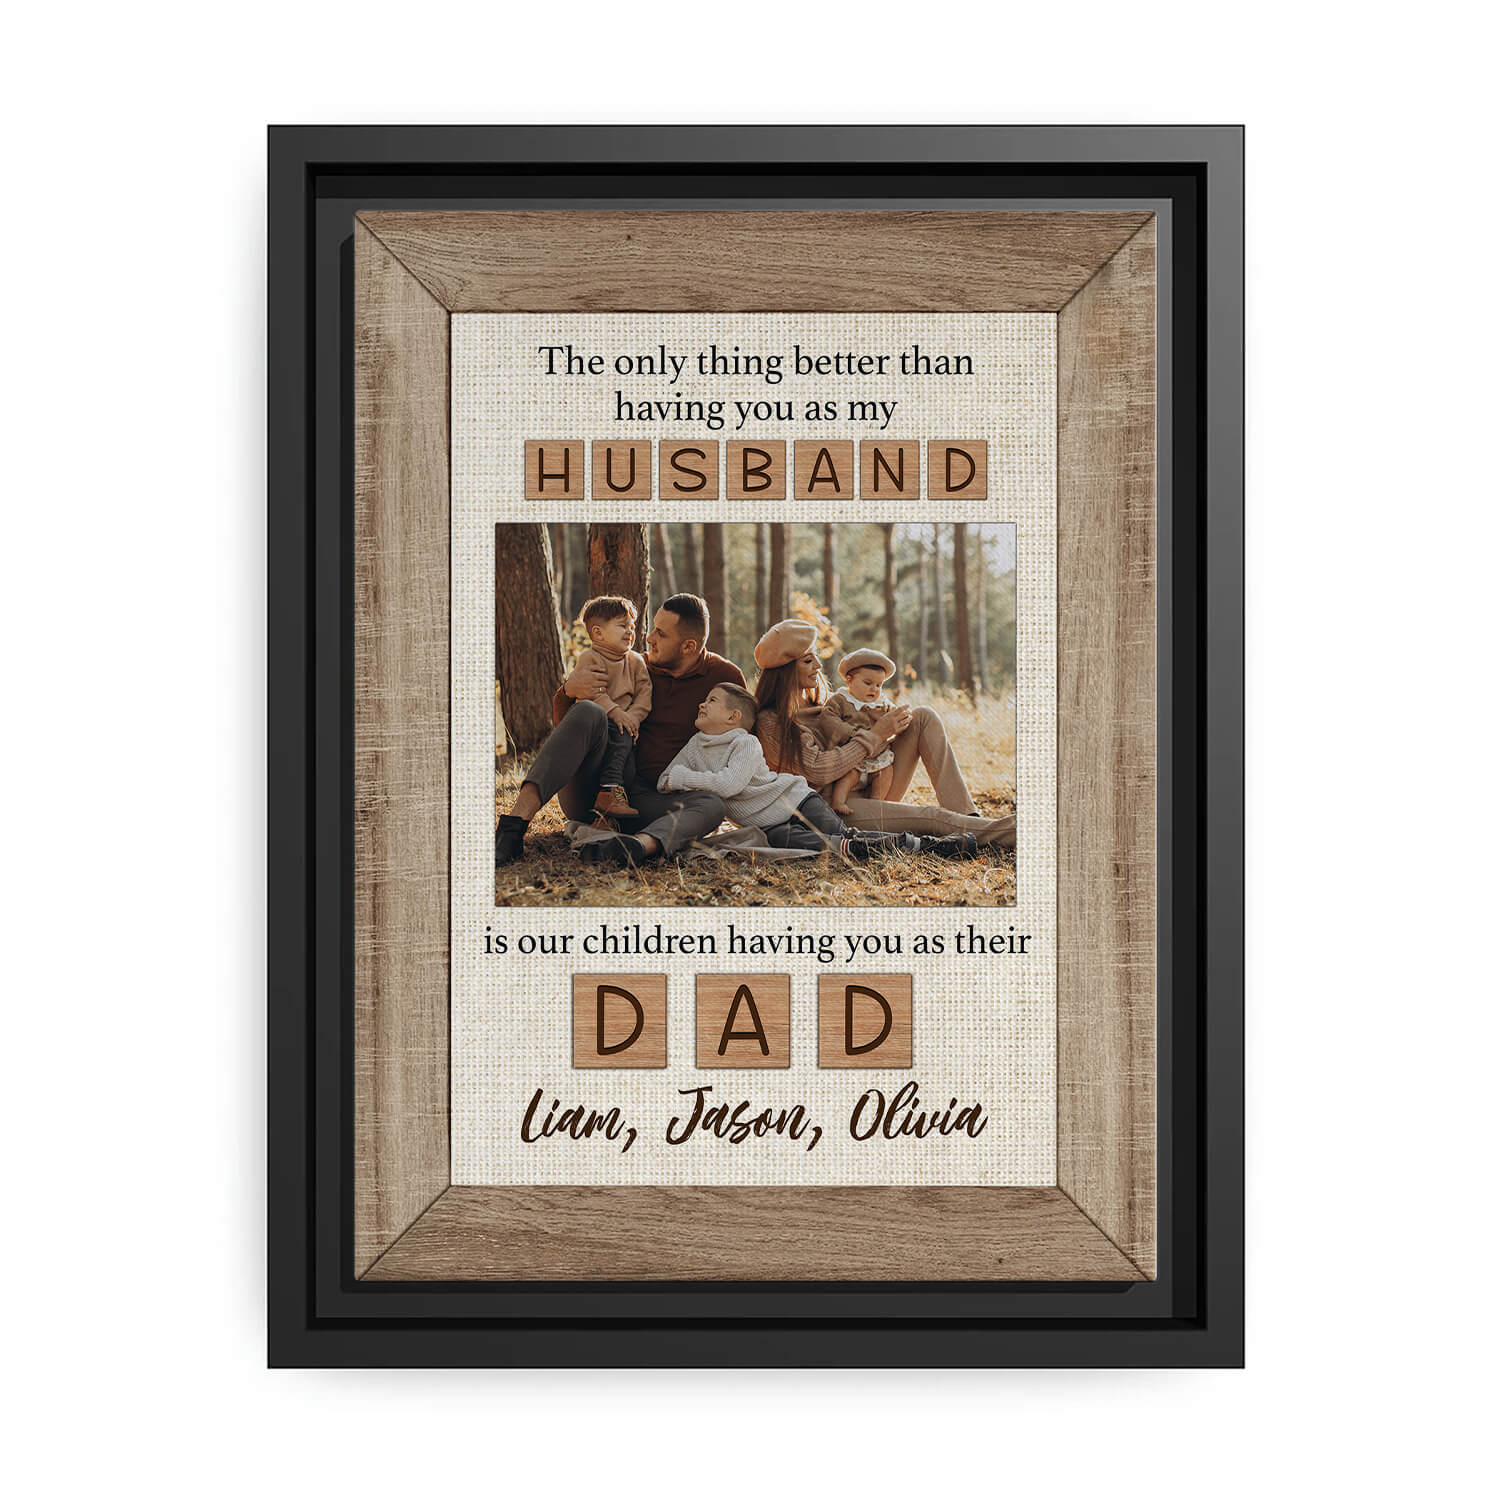 The only thing better than having you as my husband  - Personalized Father's Day or Birthday gift for Dad - Custom Canvas Print - MyMindfulGifts